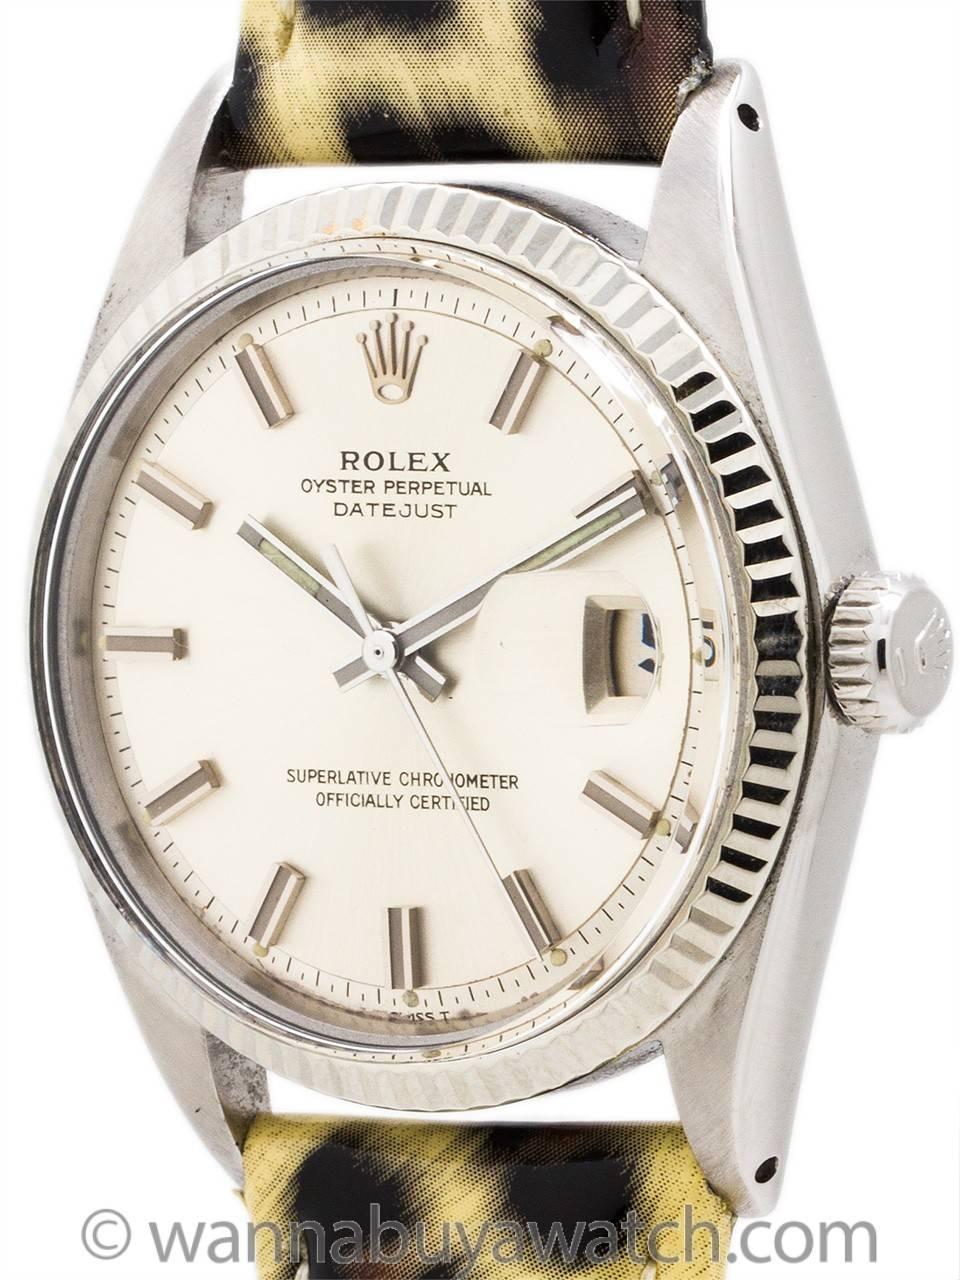 Rolex Man’s Stainless Steel Datejust ref 1601 serial # 2.6 million circa 1970. Featuring 36mm diameter case with 14K WG fluted bezel, acrylic crystal, and original silver satin pie pan dial with applied silver indexes and silver baton hands. Powered